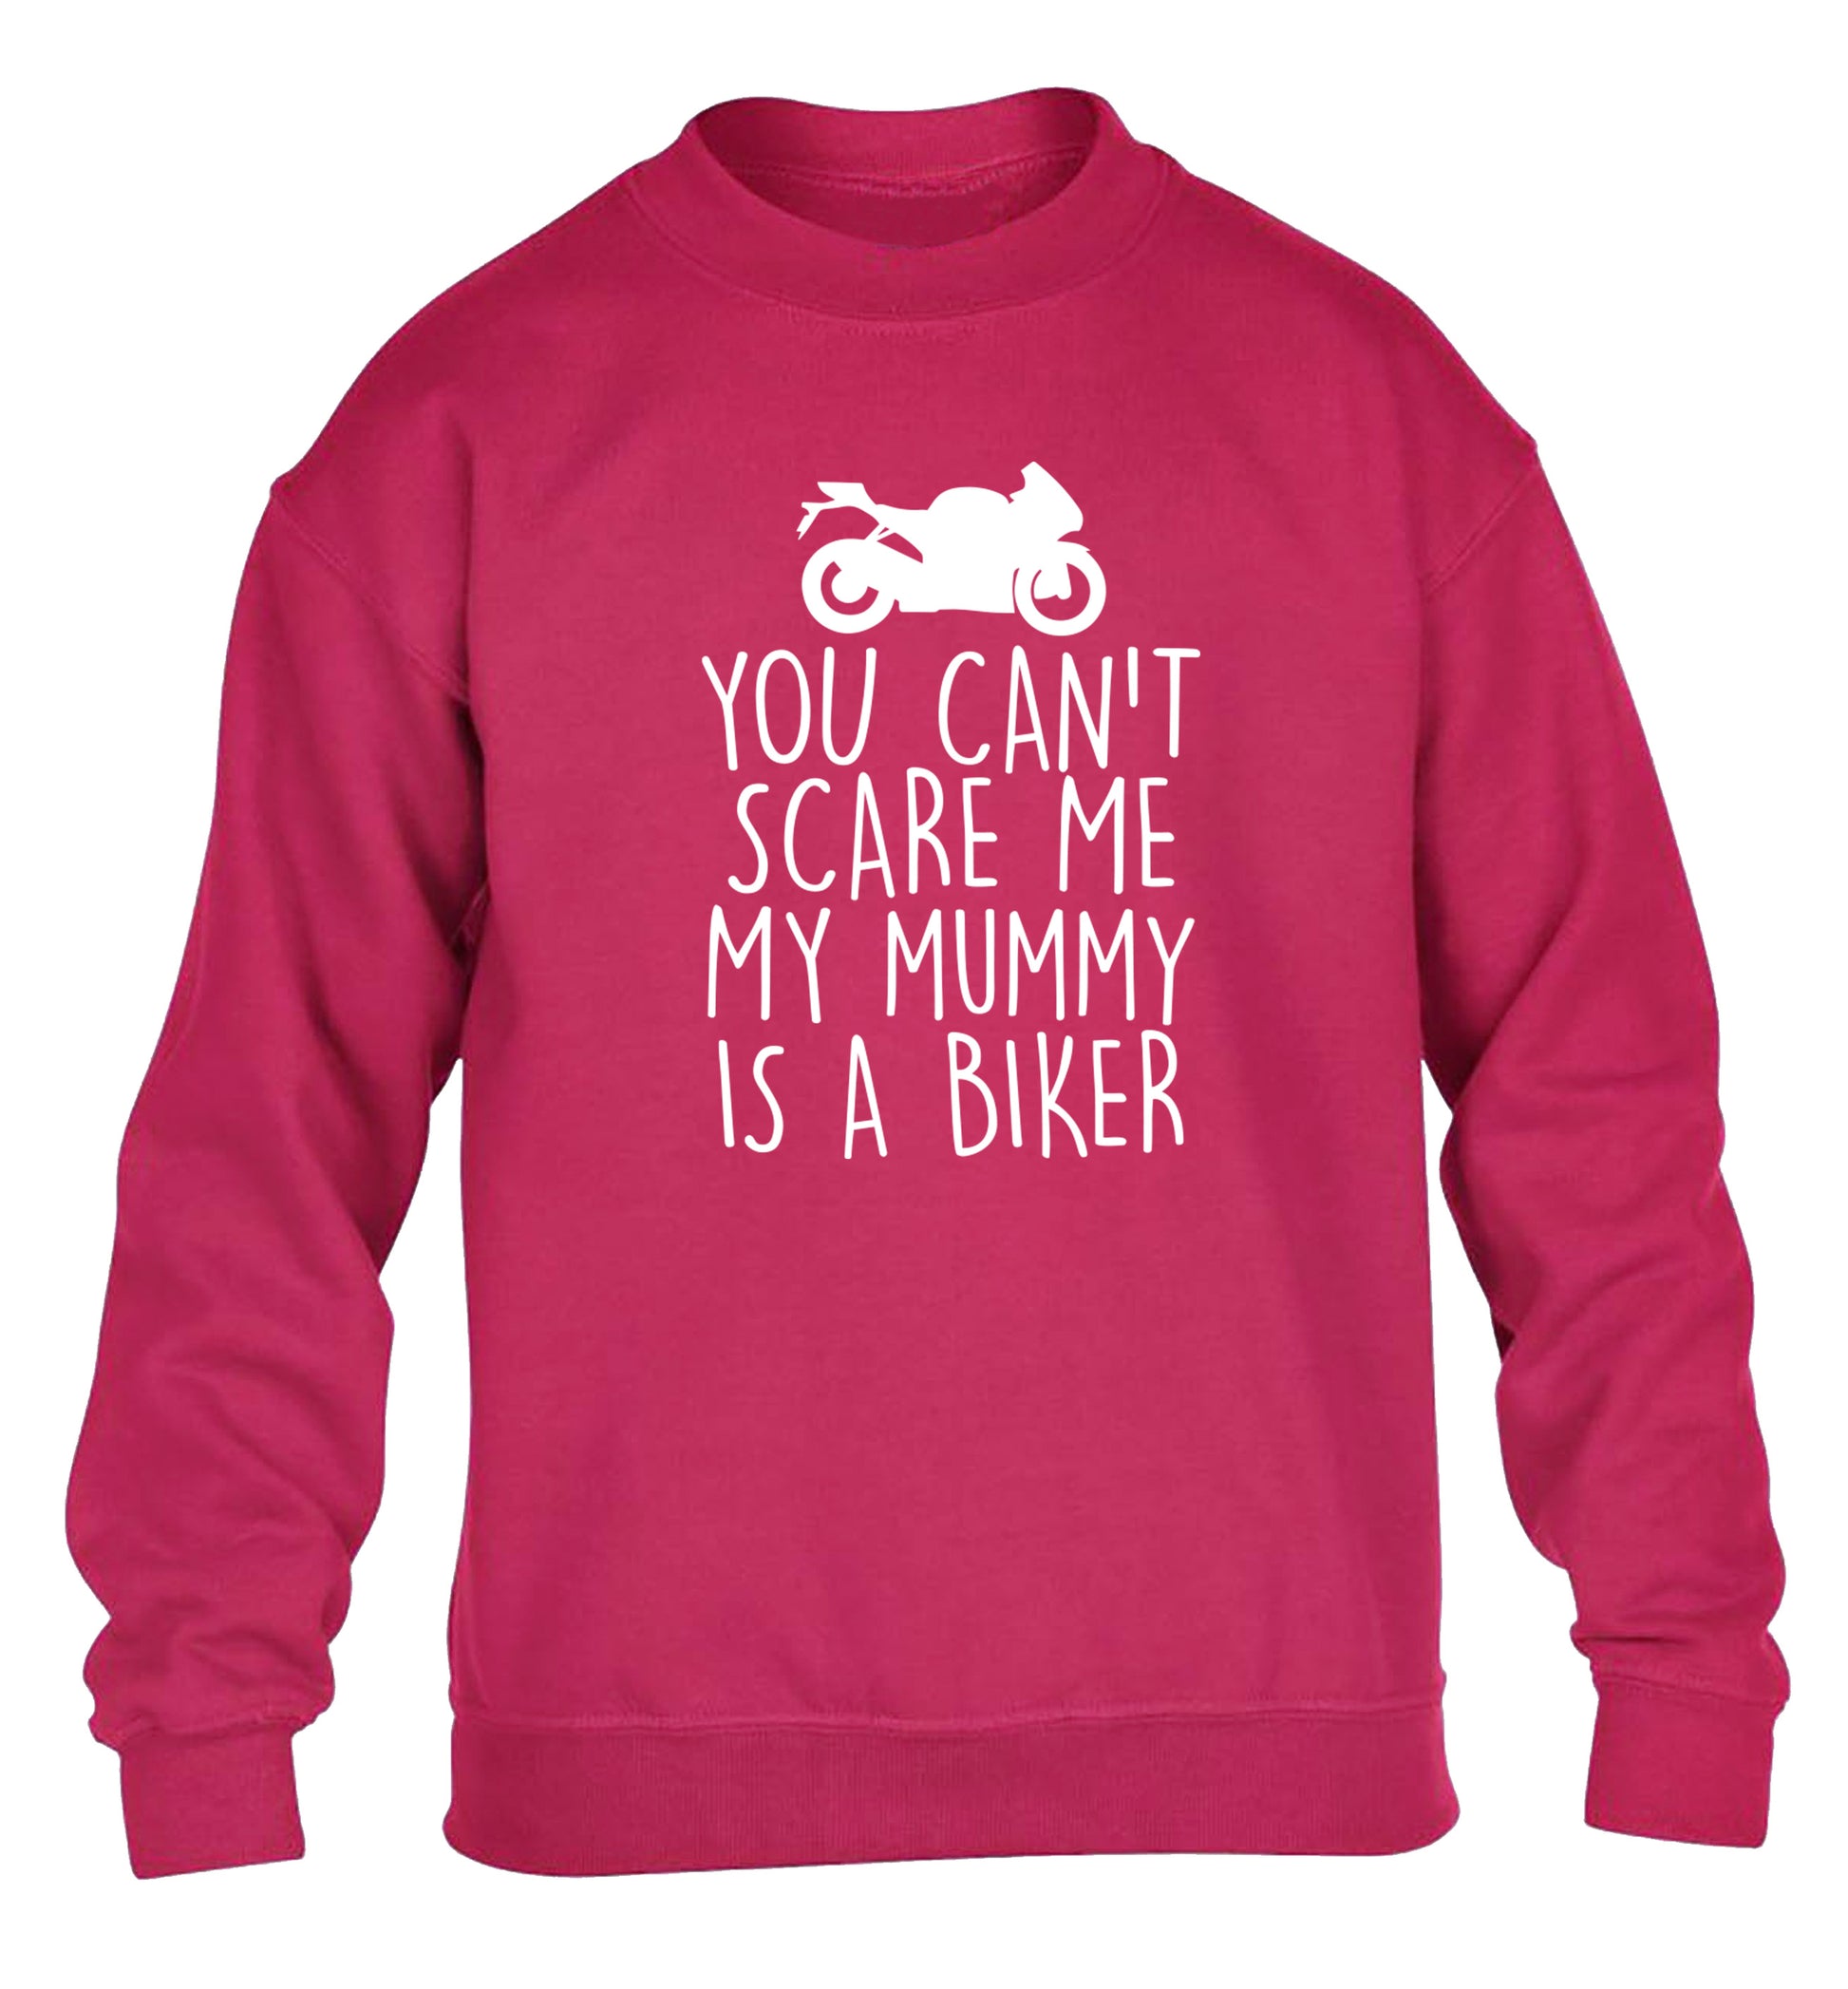 You can't scare me my mummy is a biker children's pink sweater 12-13 Years